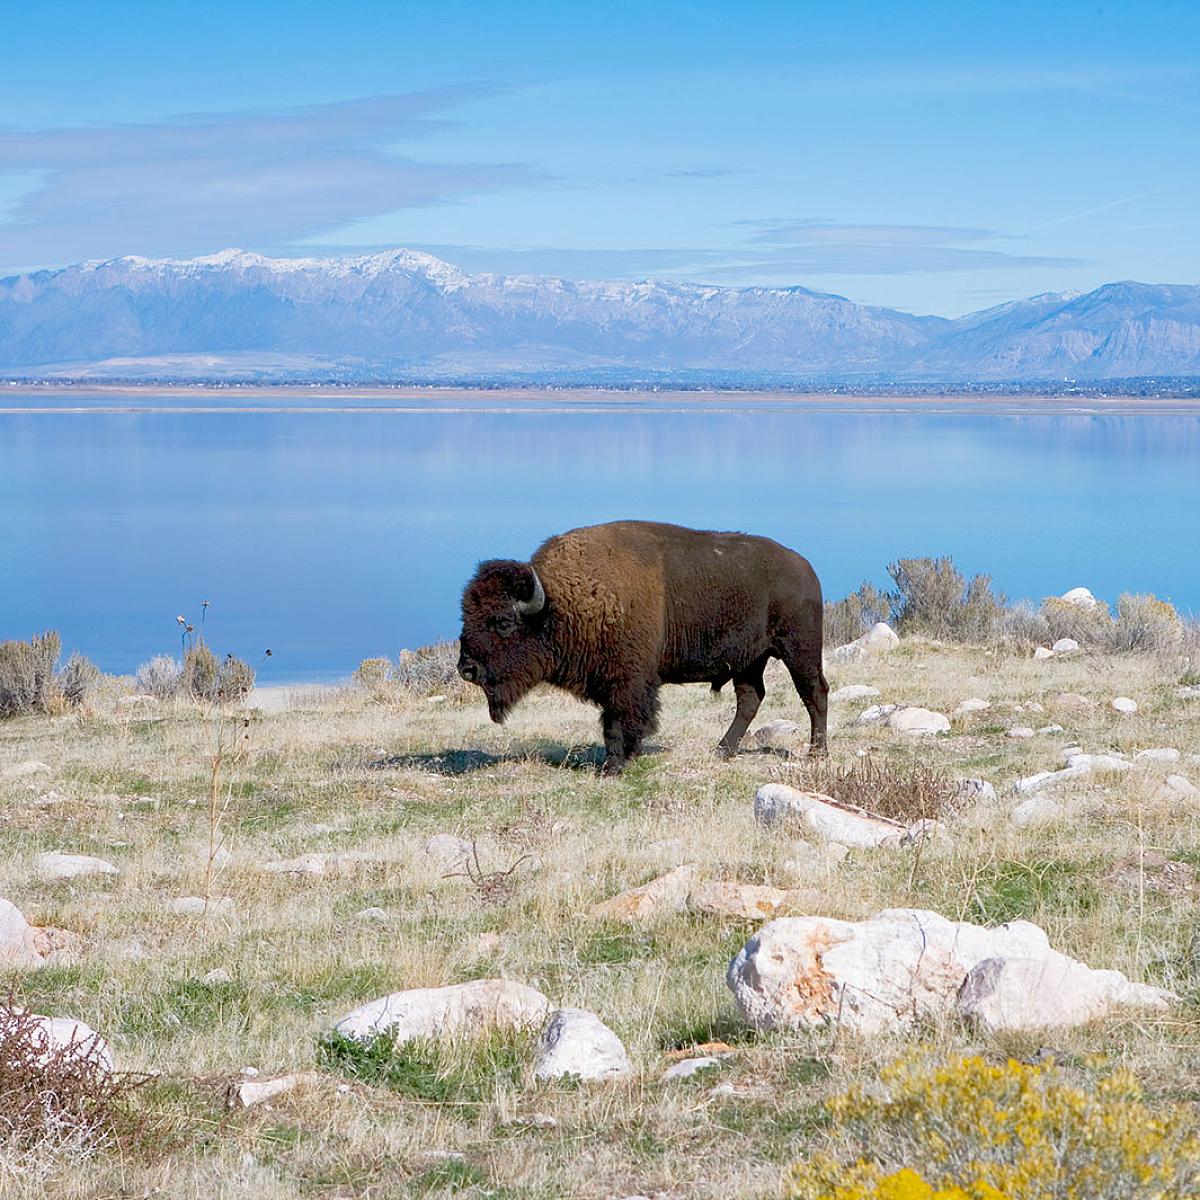 Buffalo at Antelope Island State park. The Salt Lake and Wasatch Mountains are visible in the background.